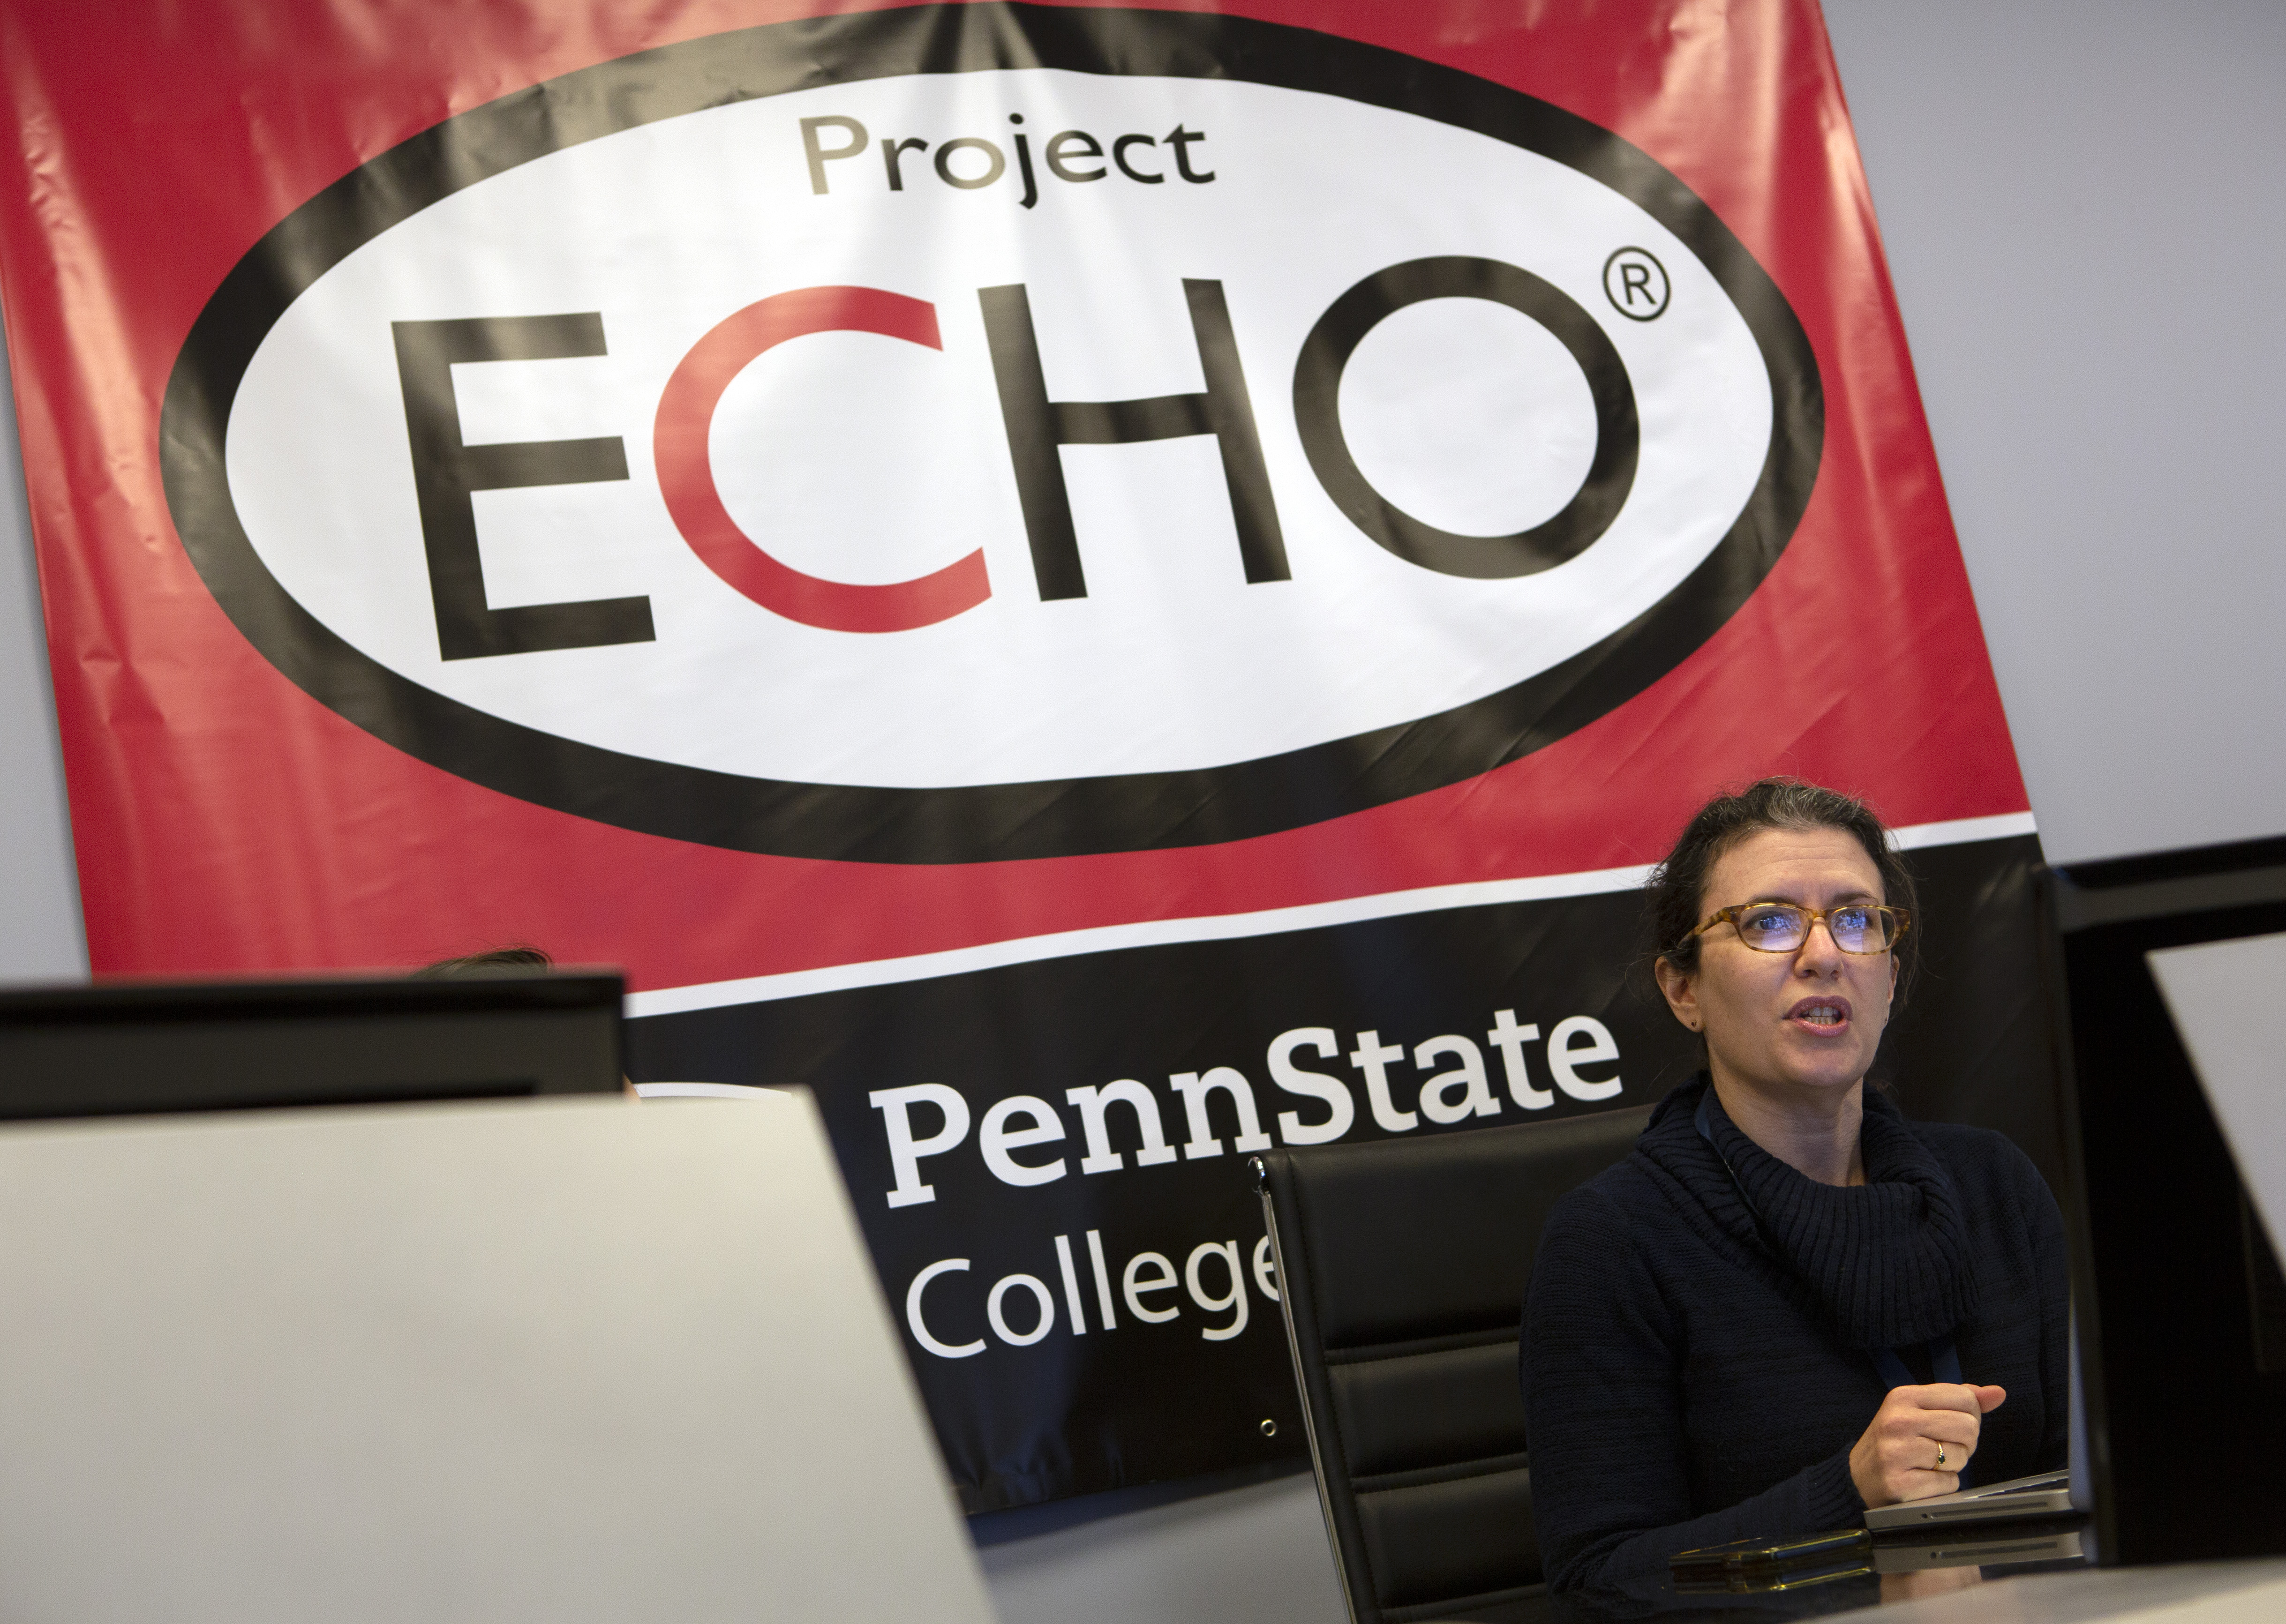 A woman with a black turtleneck sweater and glasses is seated at a table with a laptop open in front of her. She is speaking, facing a lit-up screen that is reflected in her glasses. Behind her is a large red, black and white sign reading “Project ECHO” with portions of “Penn State College of Medicine” visible. Another person is seated in the lower left corner but is mostly hidden by another computer screen.